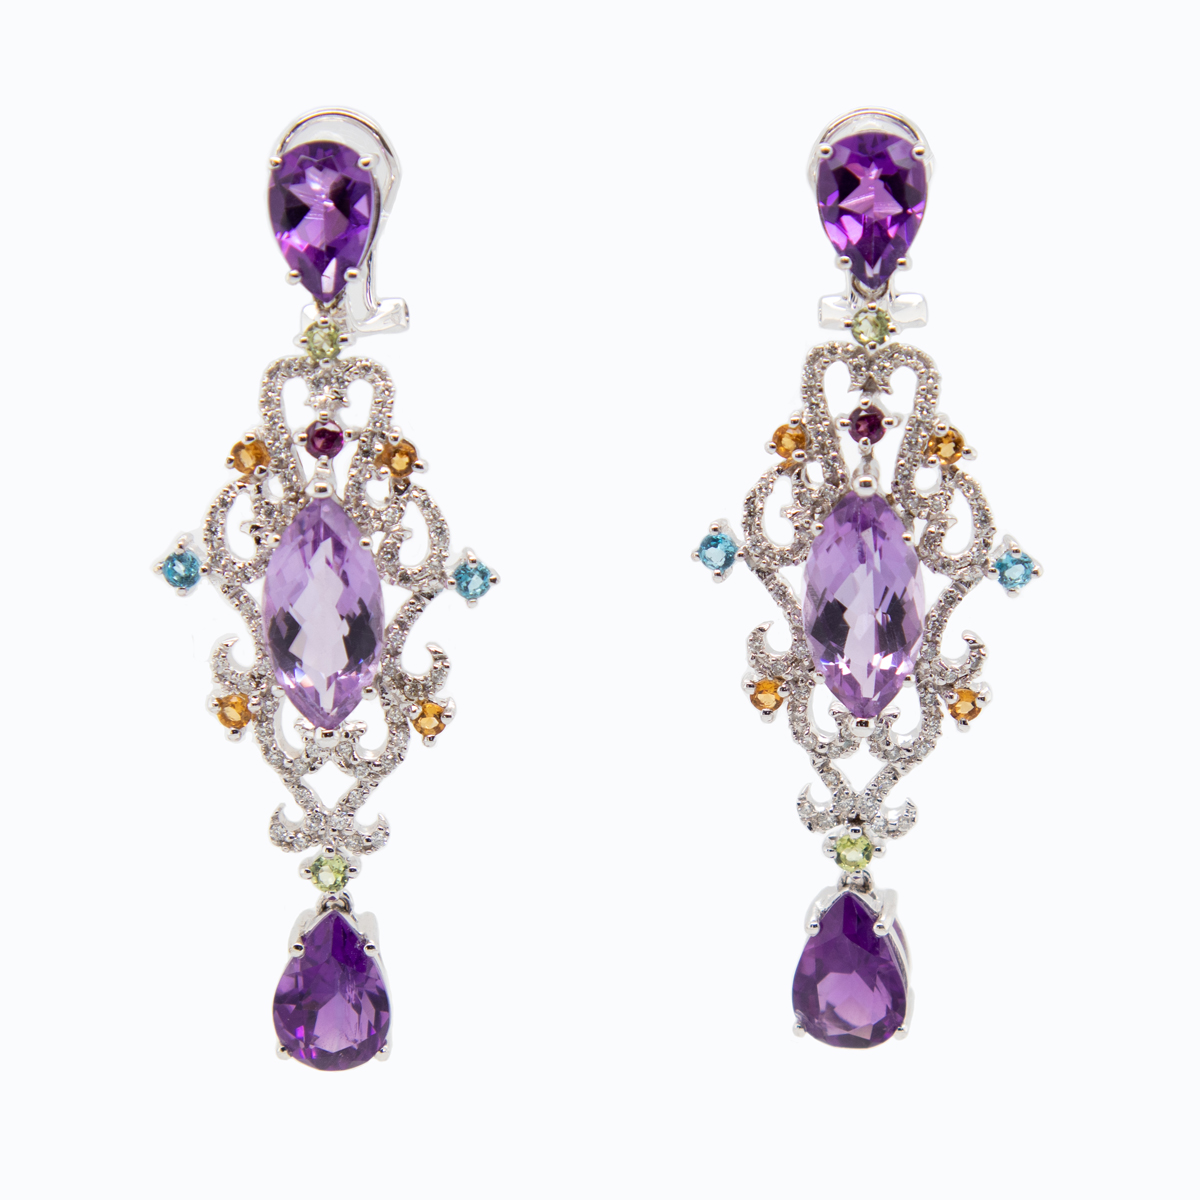 Vintage-inspired Natural Diamonds and Gemstones Drop Earrings, 18k White Gold